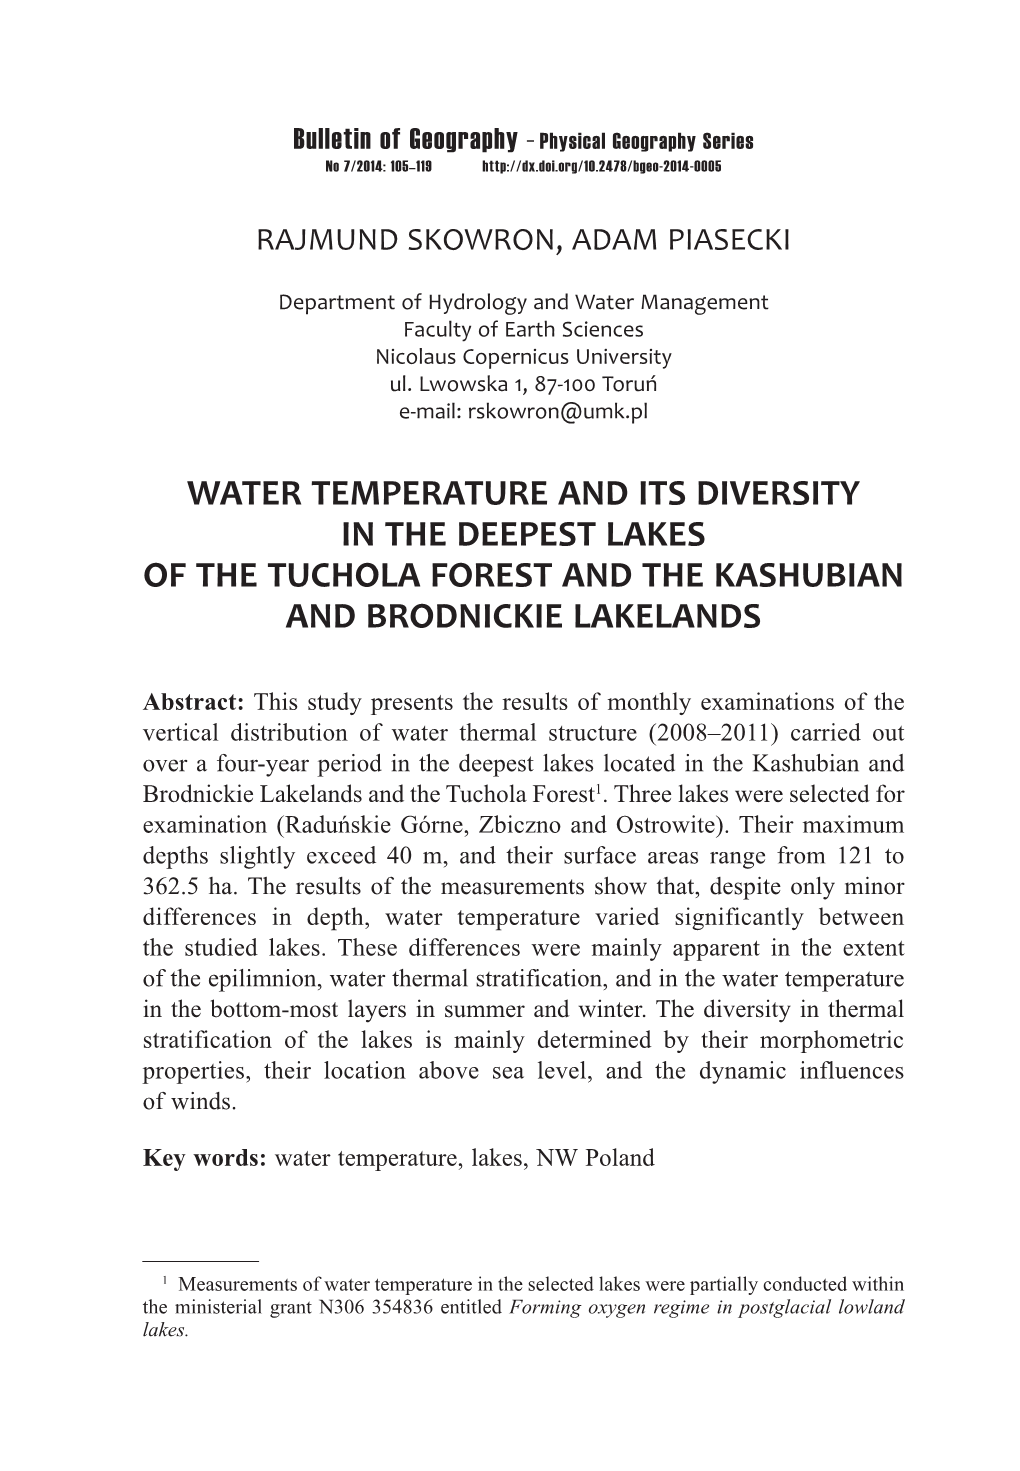 Water Temperature and Its Diversity in the Deepest Lakes of the Tuchola Forest and the Kashubian and Brodnickie Lakelands